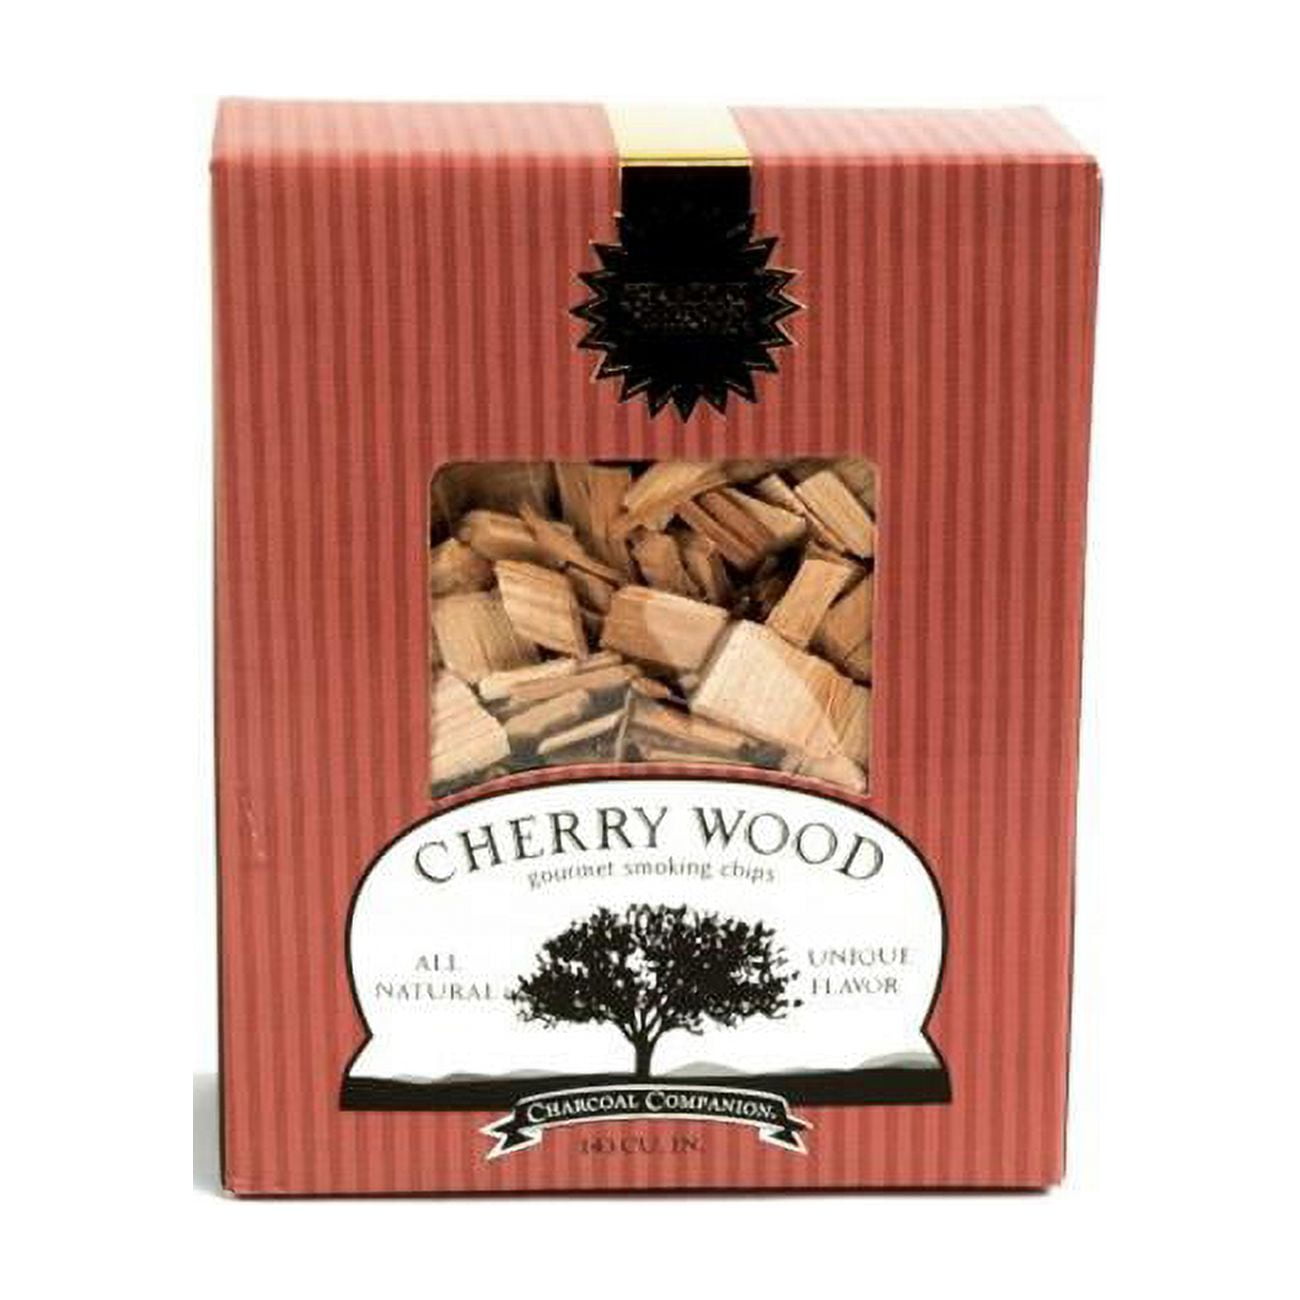 Picture of Charcoal Companion CC6001 144 cu in. Cherry Wood Gourmet Smoking Chips